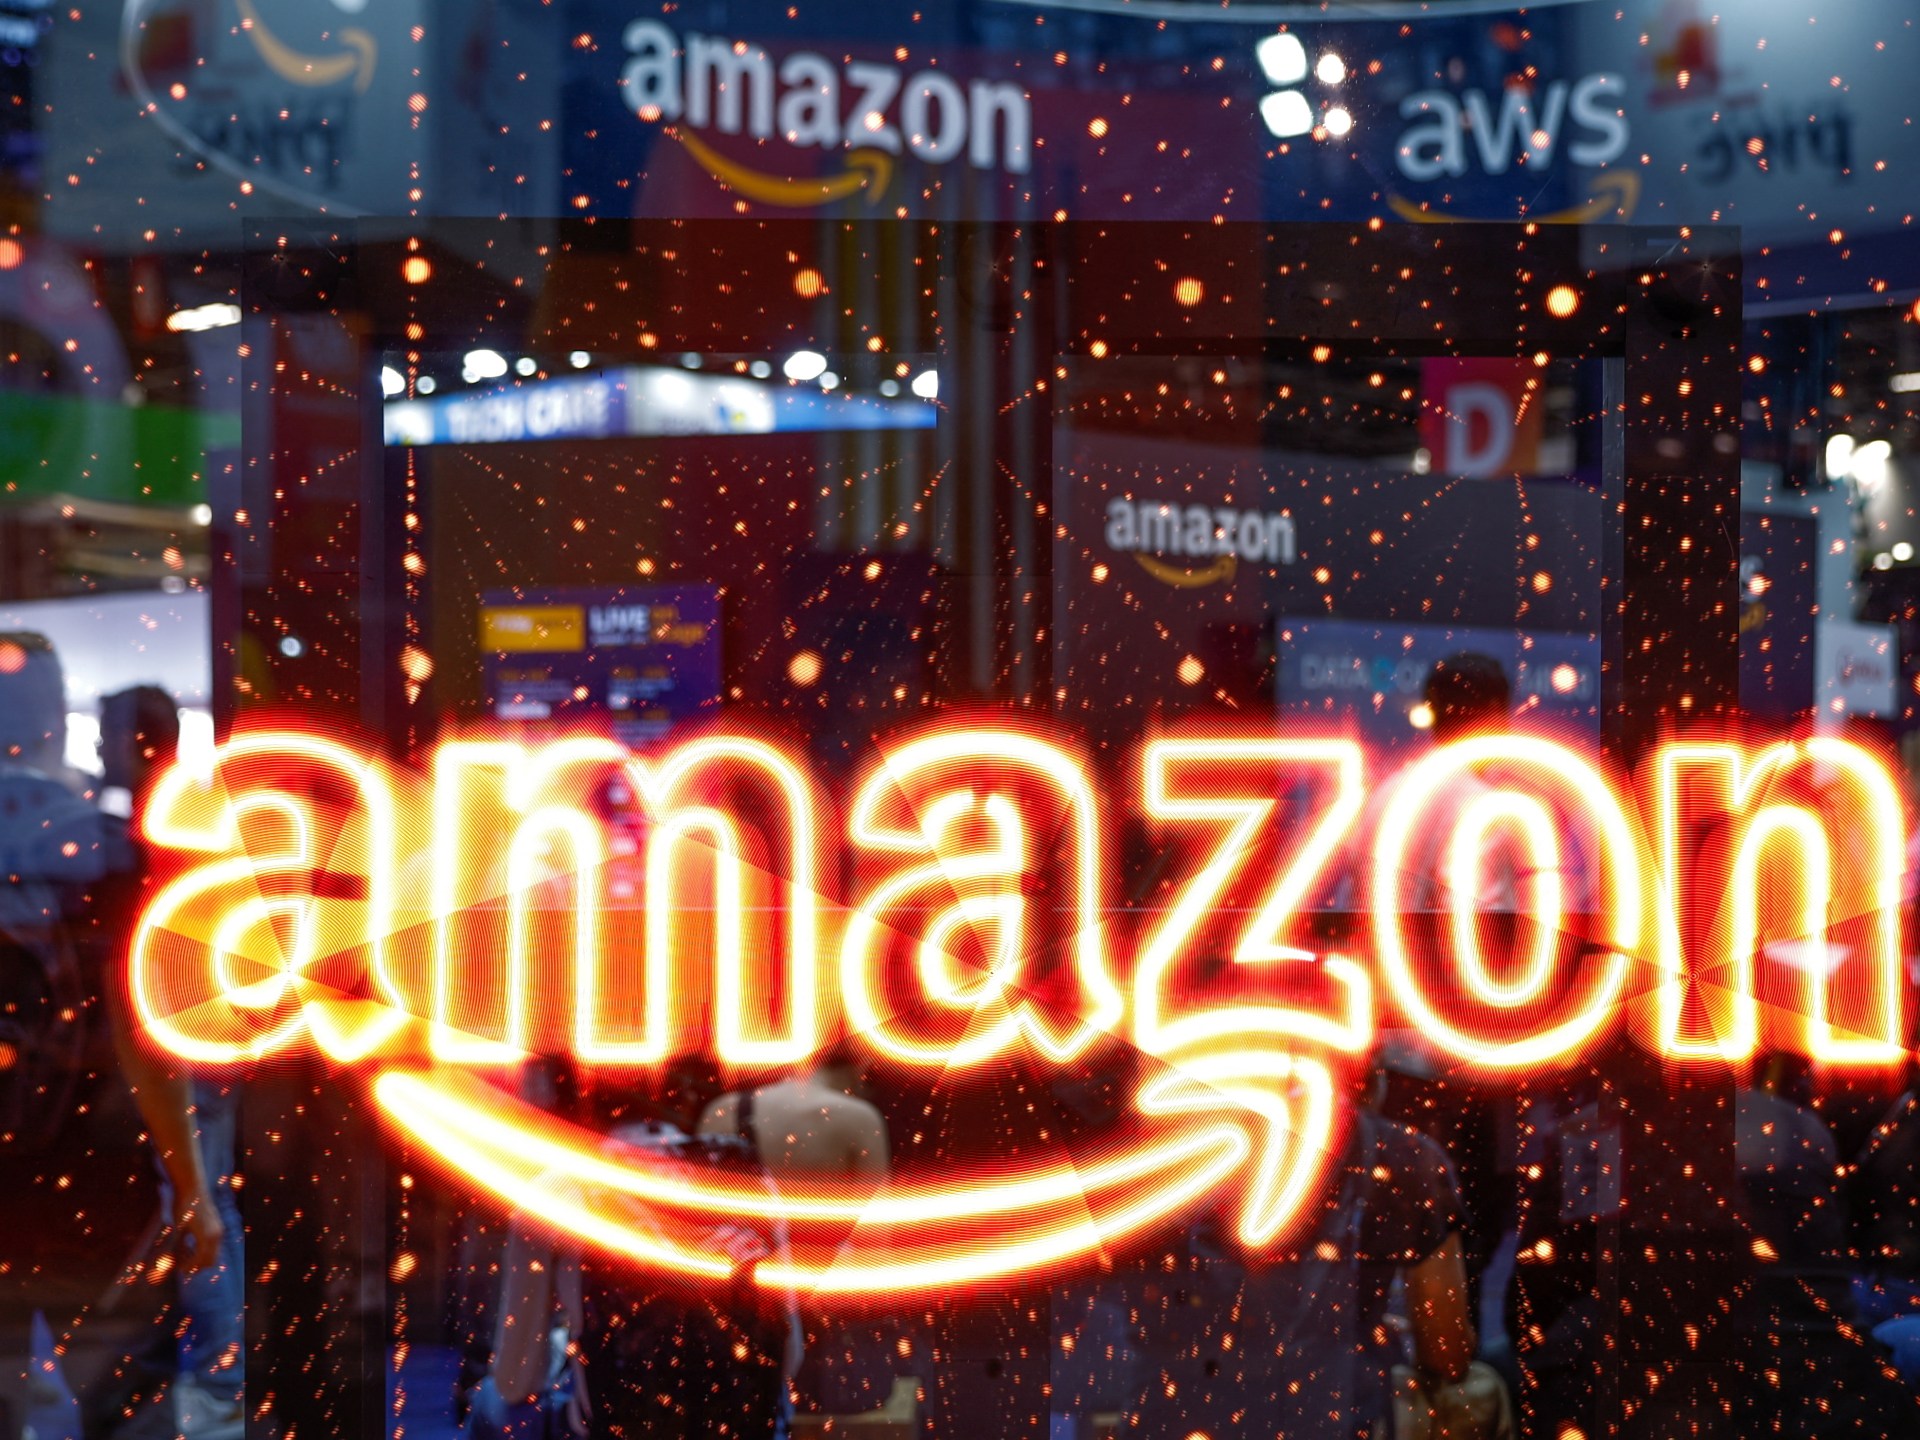 Amazon to launch discount section with direct shipping from China: Report | Retail News